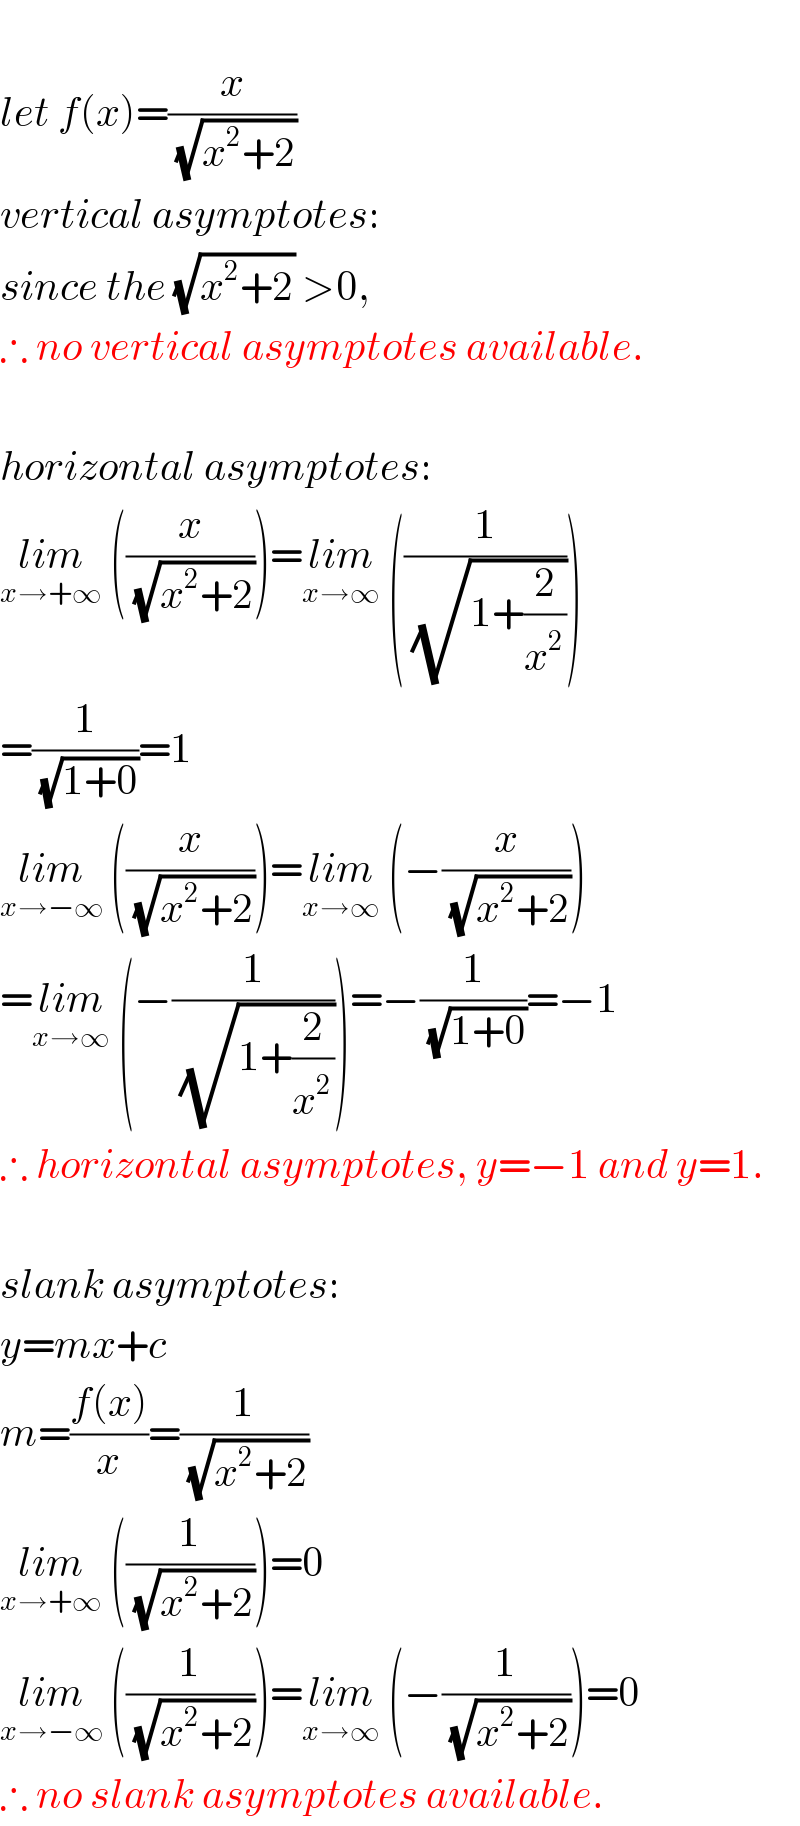   let f(x)=(x/( (√(x^2 +2))))  vertical asymptotes:  since the (√(x^2 +2)) >0,   ∴ no vertical asymptotes available.    horizontal asymptotes:  lim_(x→+∞)  ((x/( (√(x^2 +2)))))=lim_(x→∞)  ((1/( (√(1+(2/x^2 ))))))  =(1/( (√(1+0))))=1  lim_(x→−∞)  ((x/( (√(x^2 +2)))))=lim_(x→∞)  (−(x/( (√(x^2 +2)))))  =lim_(x→∞)  (−(1/( (√(1+(2/x^2 ))))))=−(1/( (√(1+0))))=−1  ∴ horizontal asymptotes, y=−1 and y=1.    slank asymptotes:  y=mx+c  m=((f(x))/x)=(1/( (√(x^2 +2))))  lim_(x→+∞)  ((1/( (√(x^2 +2)))))=0  lim_(x→−∞)  ((1/( (√(x^2 +2)))))=lim_(x→∞)  (−(1/( (√(x^2 +2)))))=0  ∴ no slank asymptotes available.  